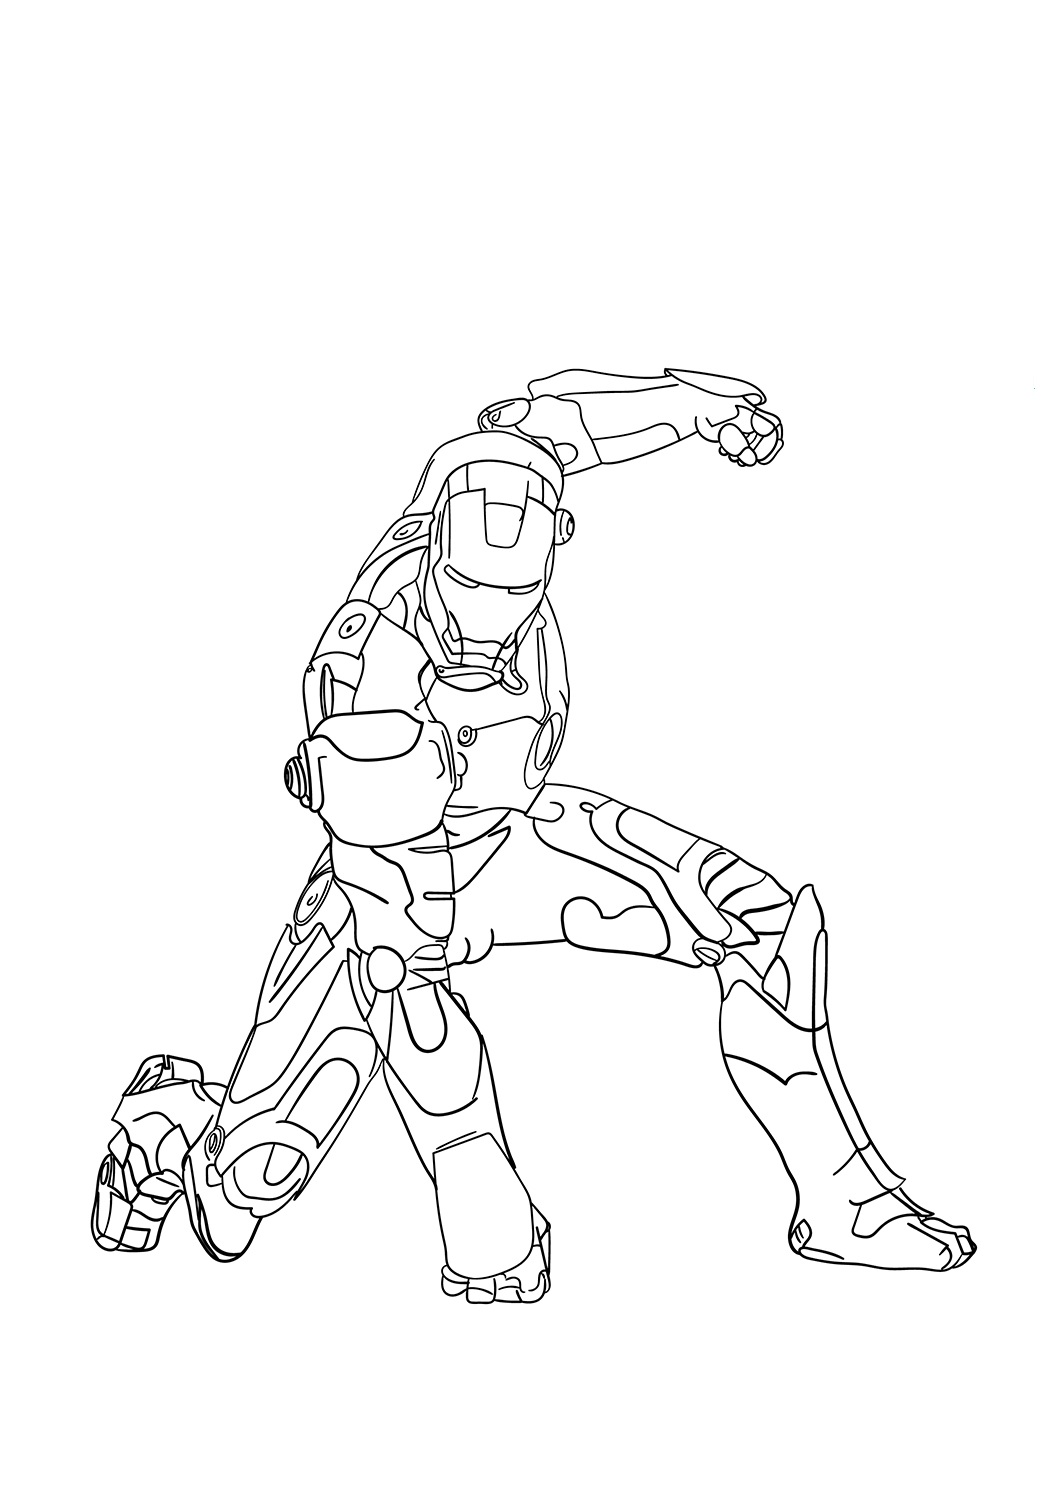 Iron Man Coloring Page - Free Printable Coloring Pages for Kids